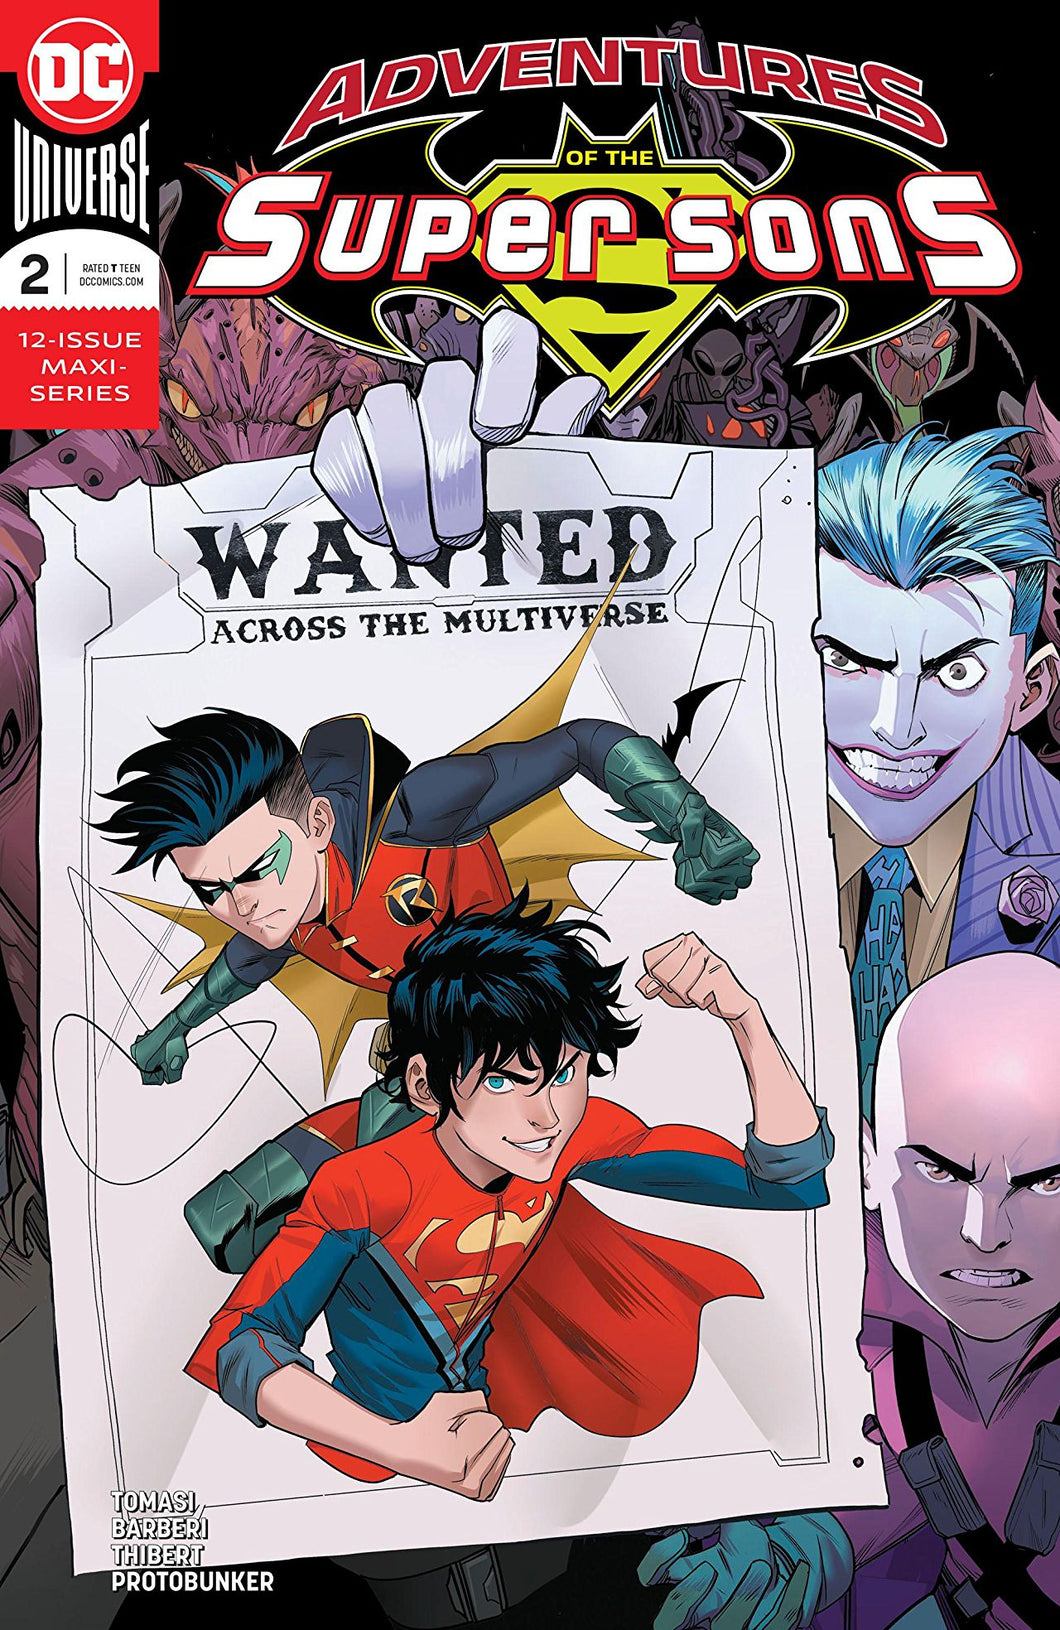 ADVENTURES OF THE SUPER SONS #2 (OF 12) (09/05/2018)